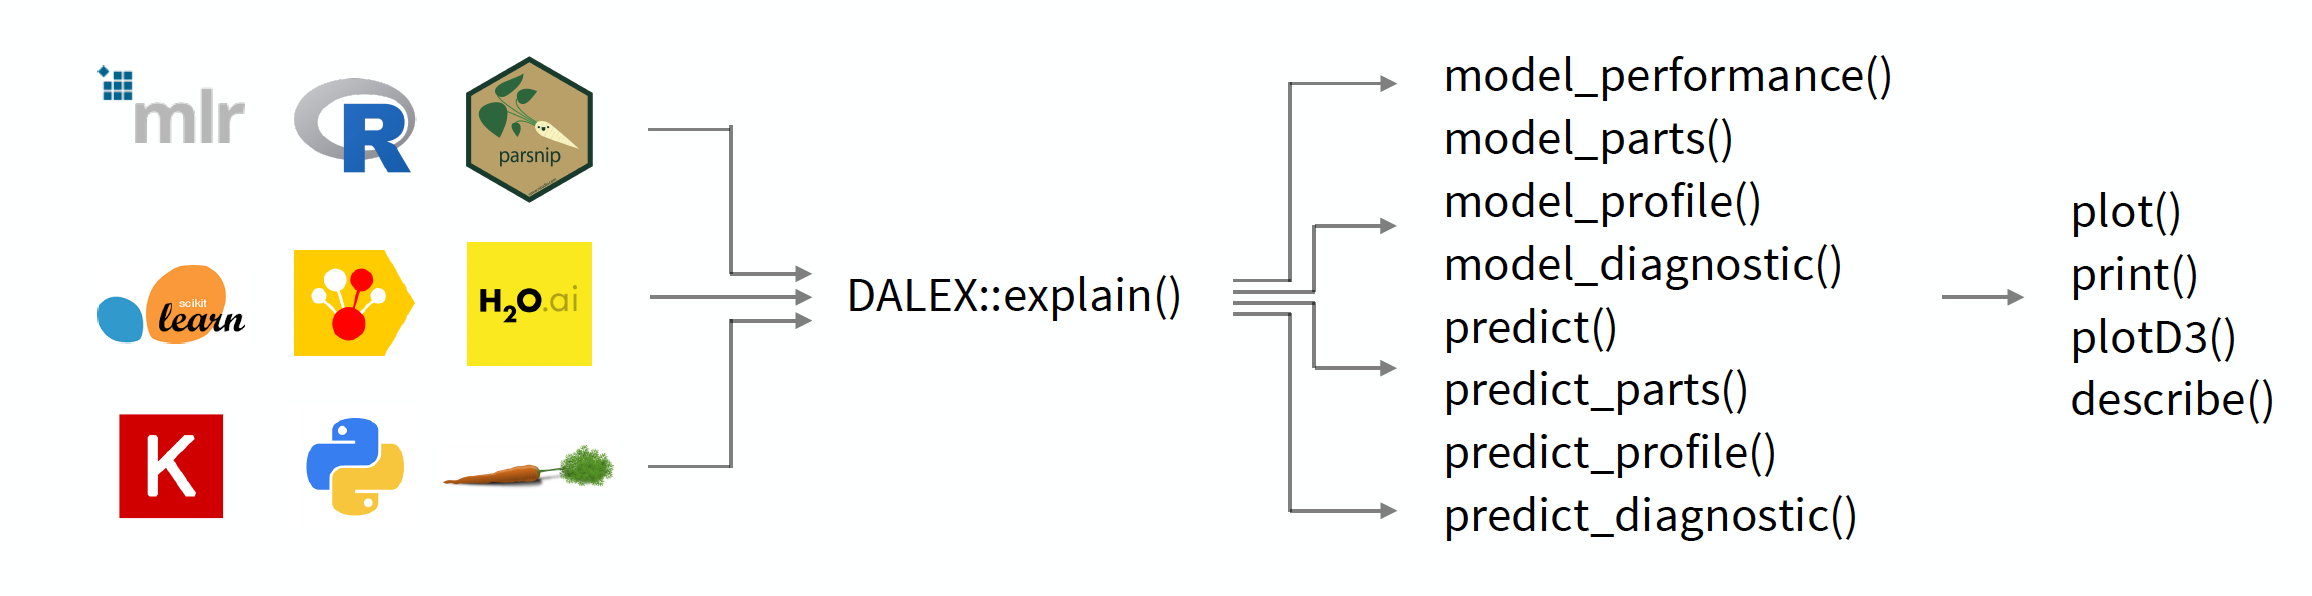 The DALEX package creates a layer of abstraction around the models, allowing you to work with different models in a uniform way. The key function is the explain function, which wraps any model into a uniform interface. Then other functions from DALEX package can be used on the resulting object to explore the model.